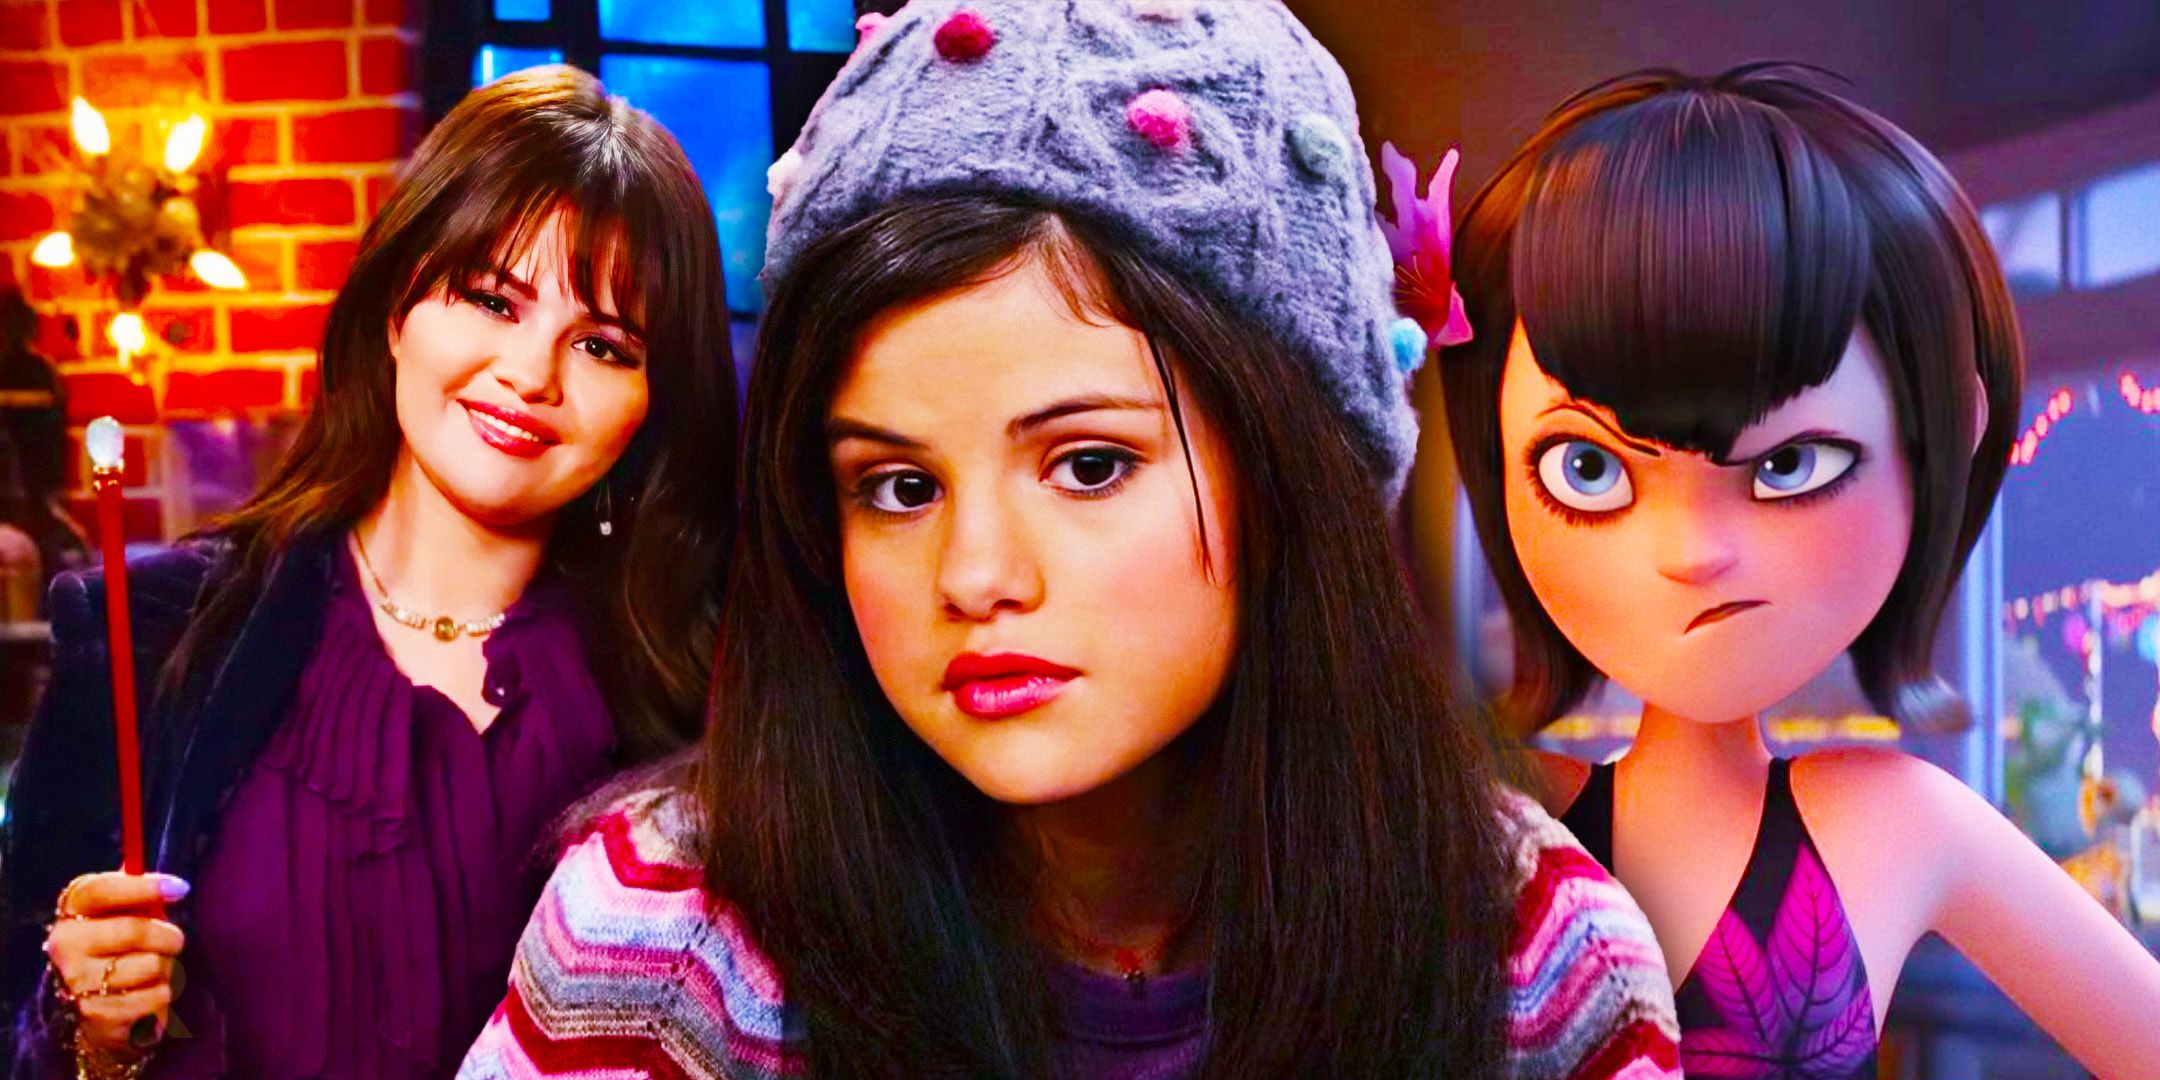 Selena Gomezs Return To 17-Year-Old Disney Show Officially Ties A Big Record With Her $1.3 Billion Movie Franchise